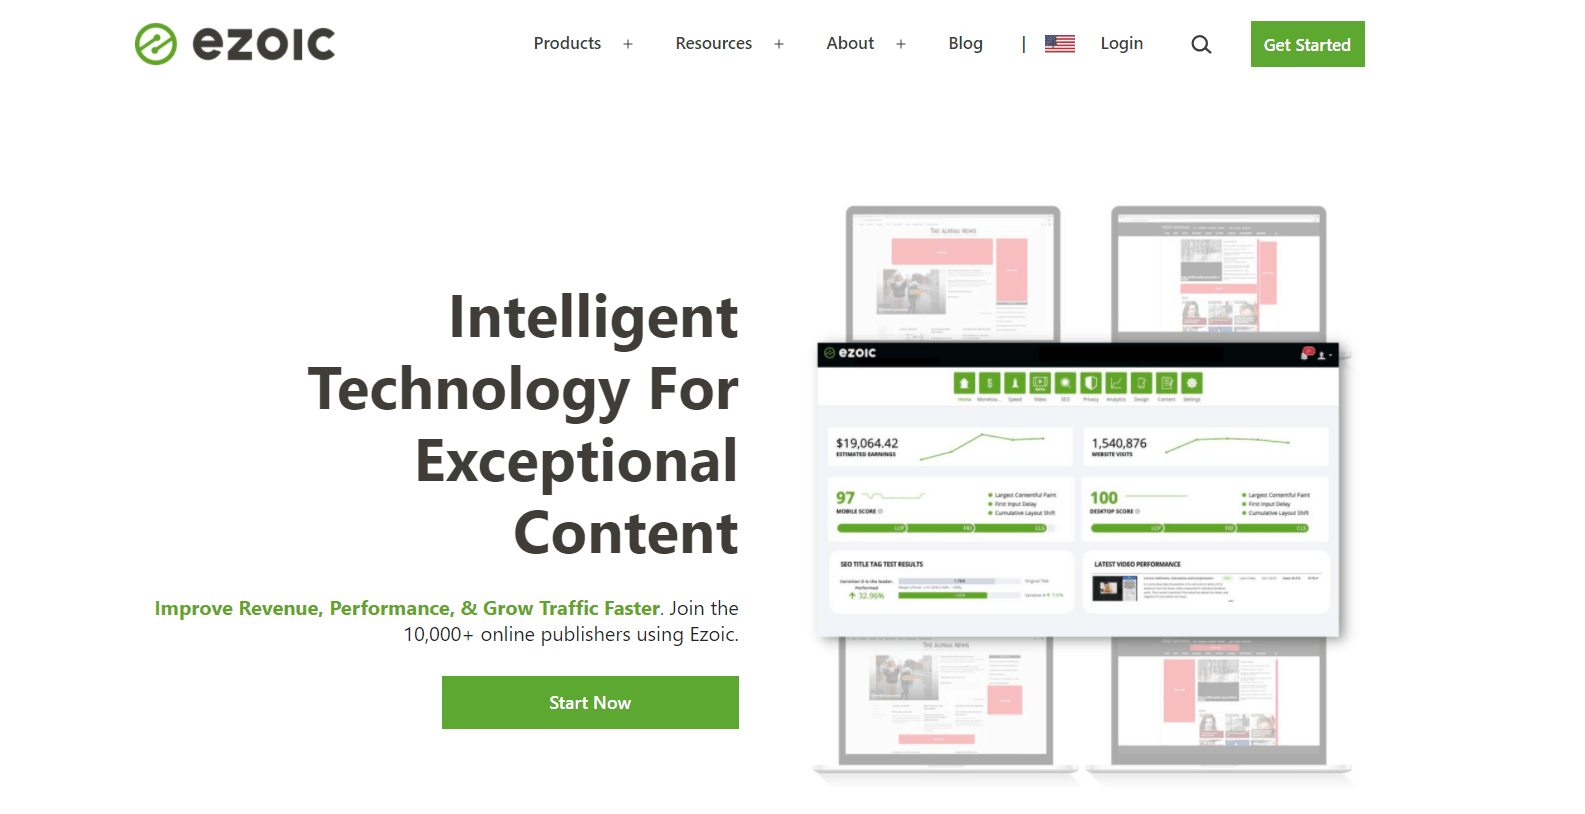 10,000+ online publishers use Ezoic to improve revenue, performance and grow traffic.